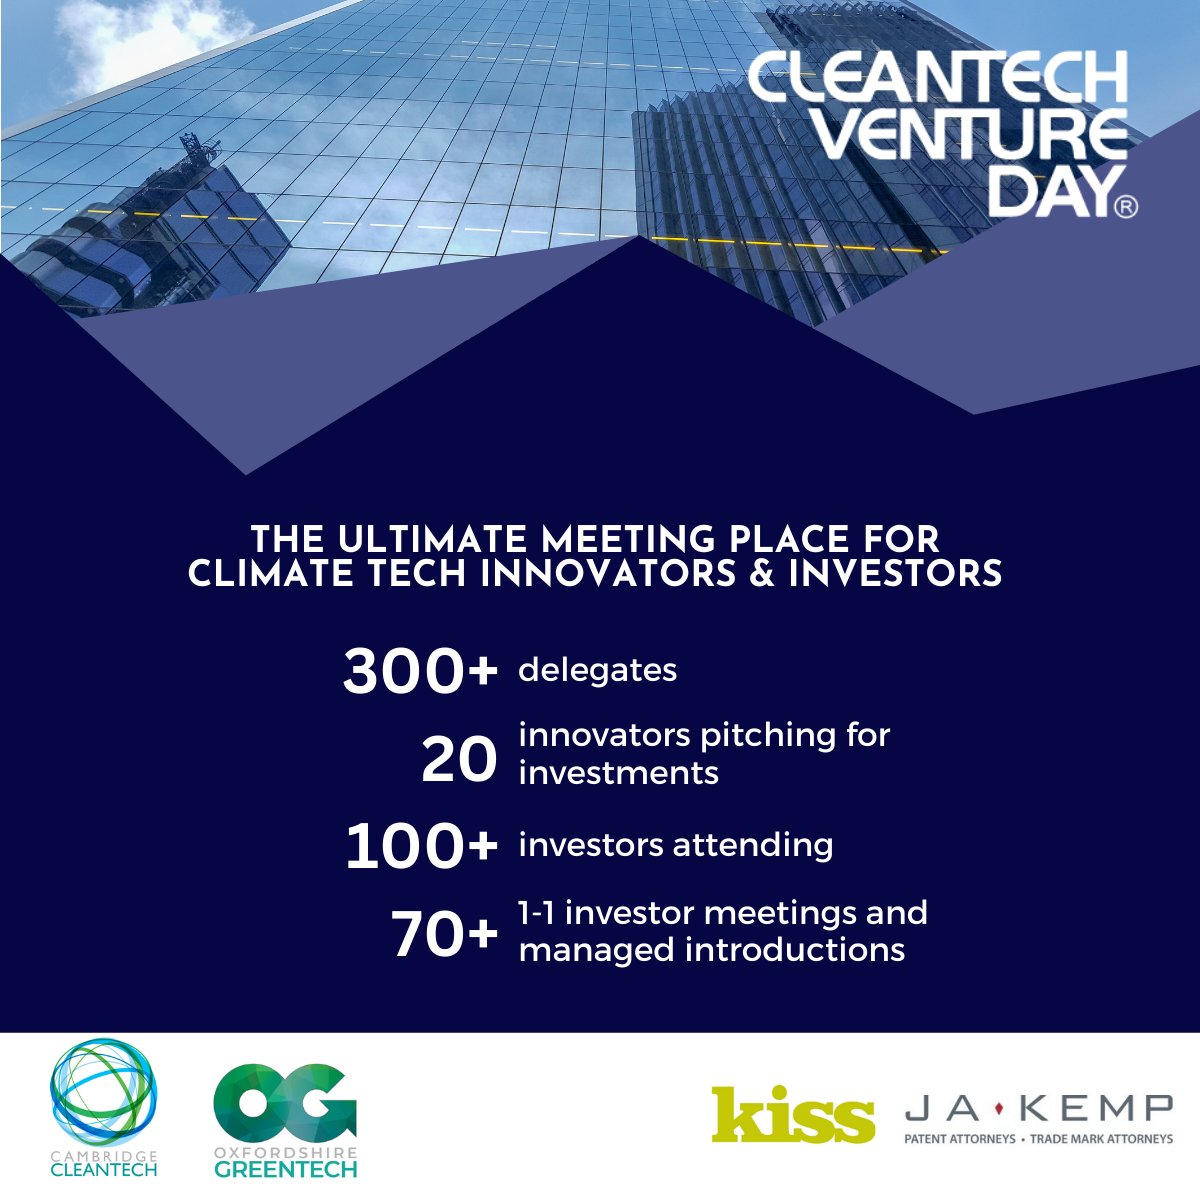 🔎 ✔️ Discover the cleantech pioneers creating climate change mitigation technologies for the #RaceToZero 
 
🌍Meet them at Cleantech Venture Day  in London on the 11th October as they pitch for investment. #impactinvesting #ESG

Book your place: ow.ly/cAhm50OkfxF